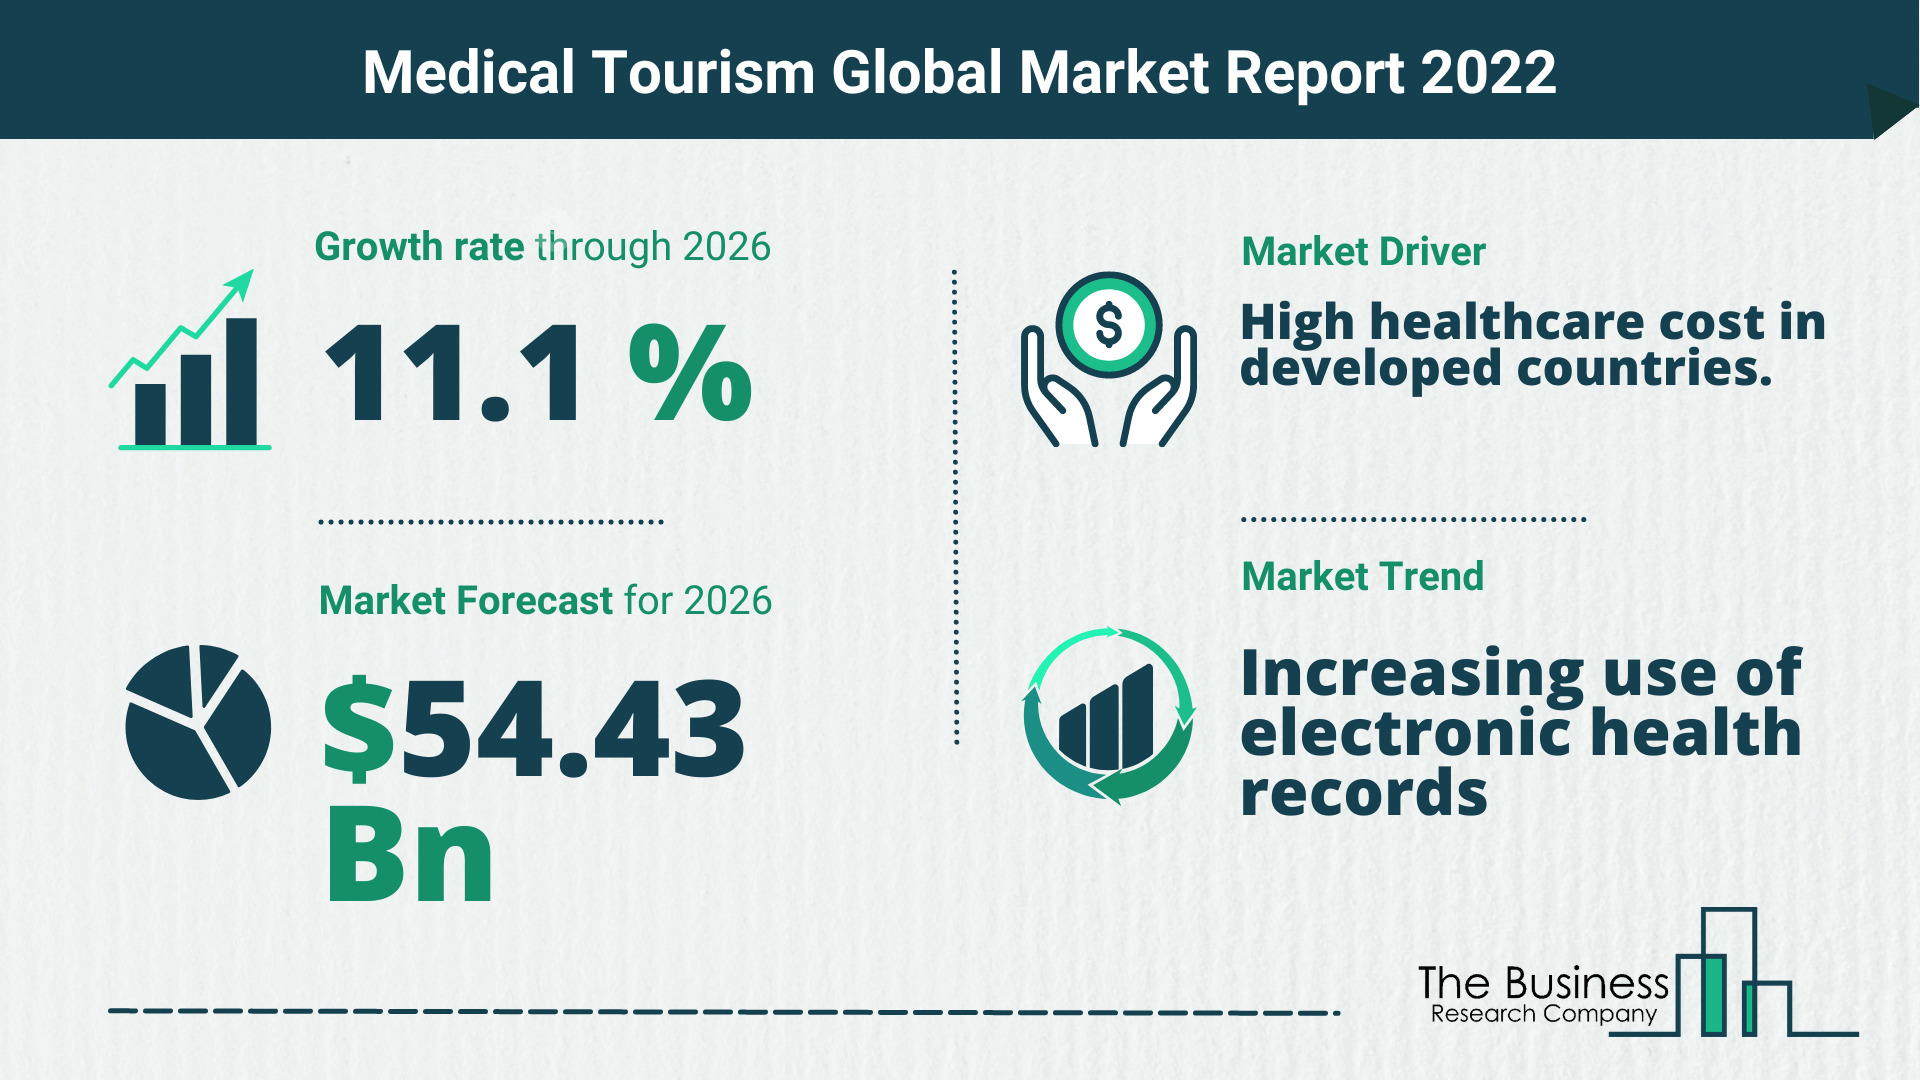 What Is The Medical Tourism Market Overview In 2022?